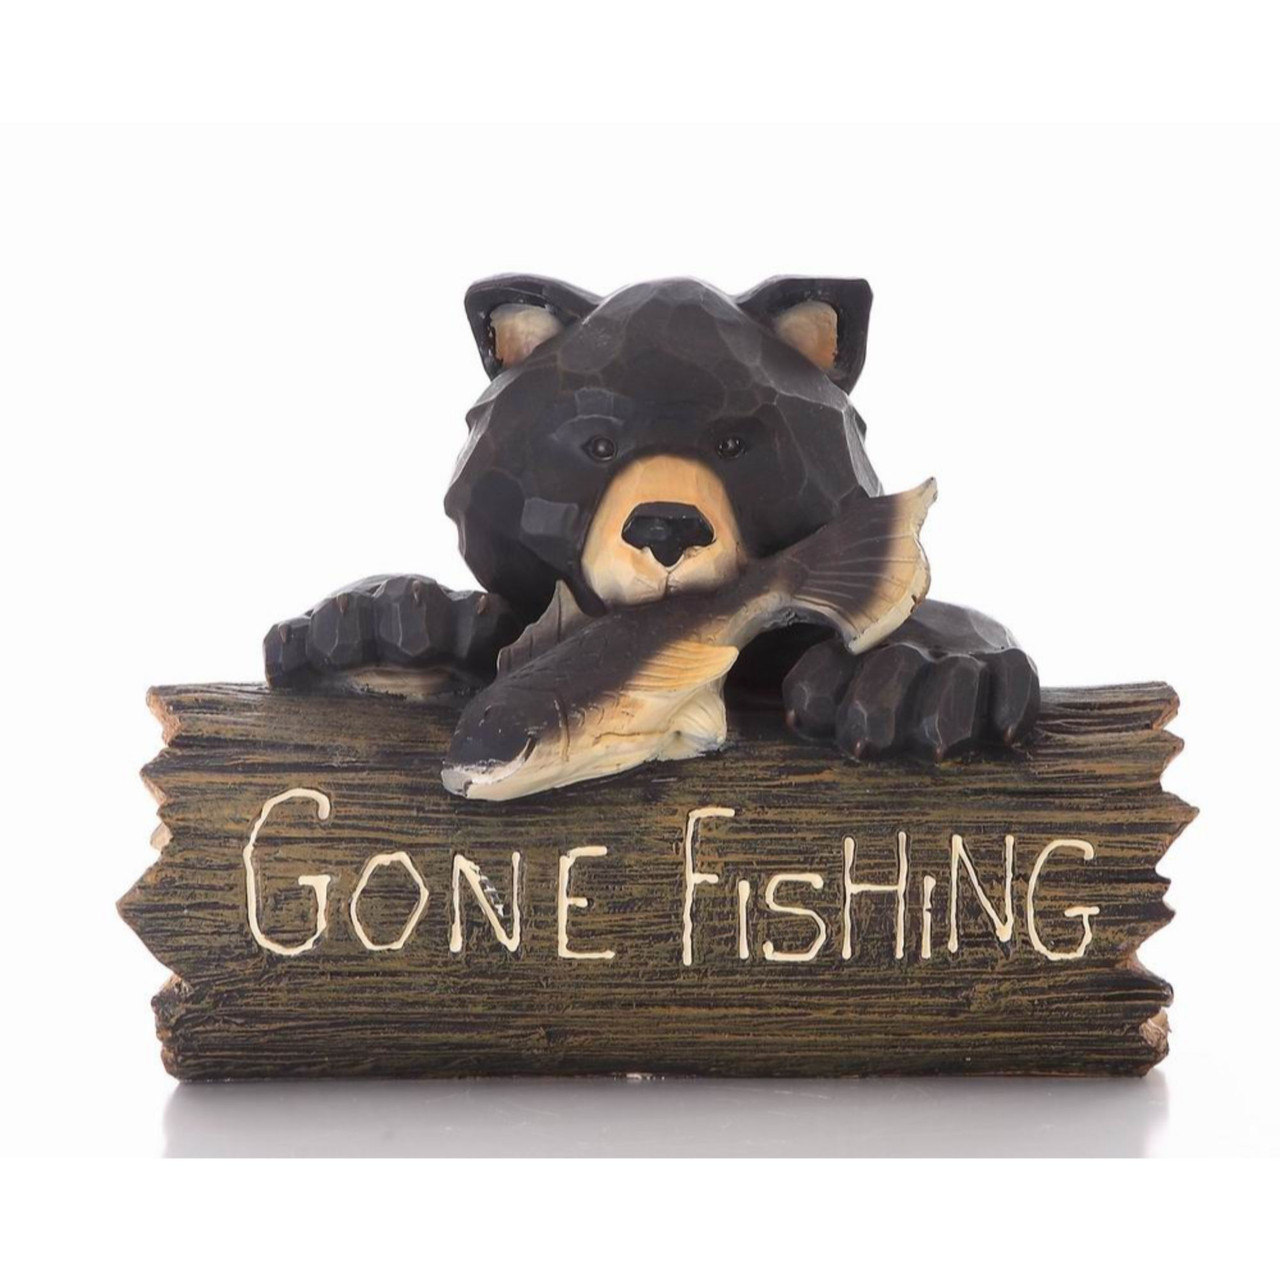 12.25 Black & Brown Bear with GONE FISHING Sign Garden Statue